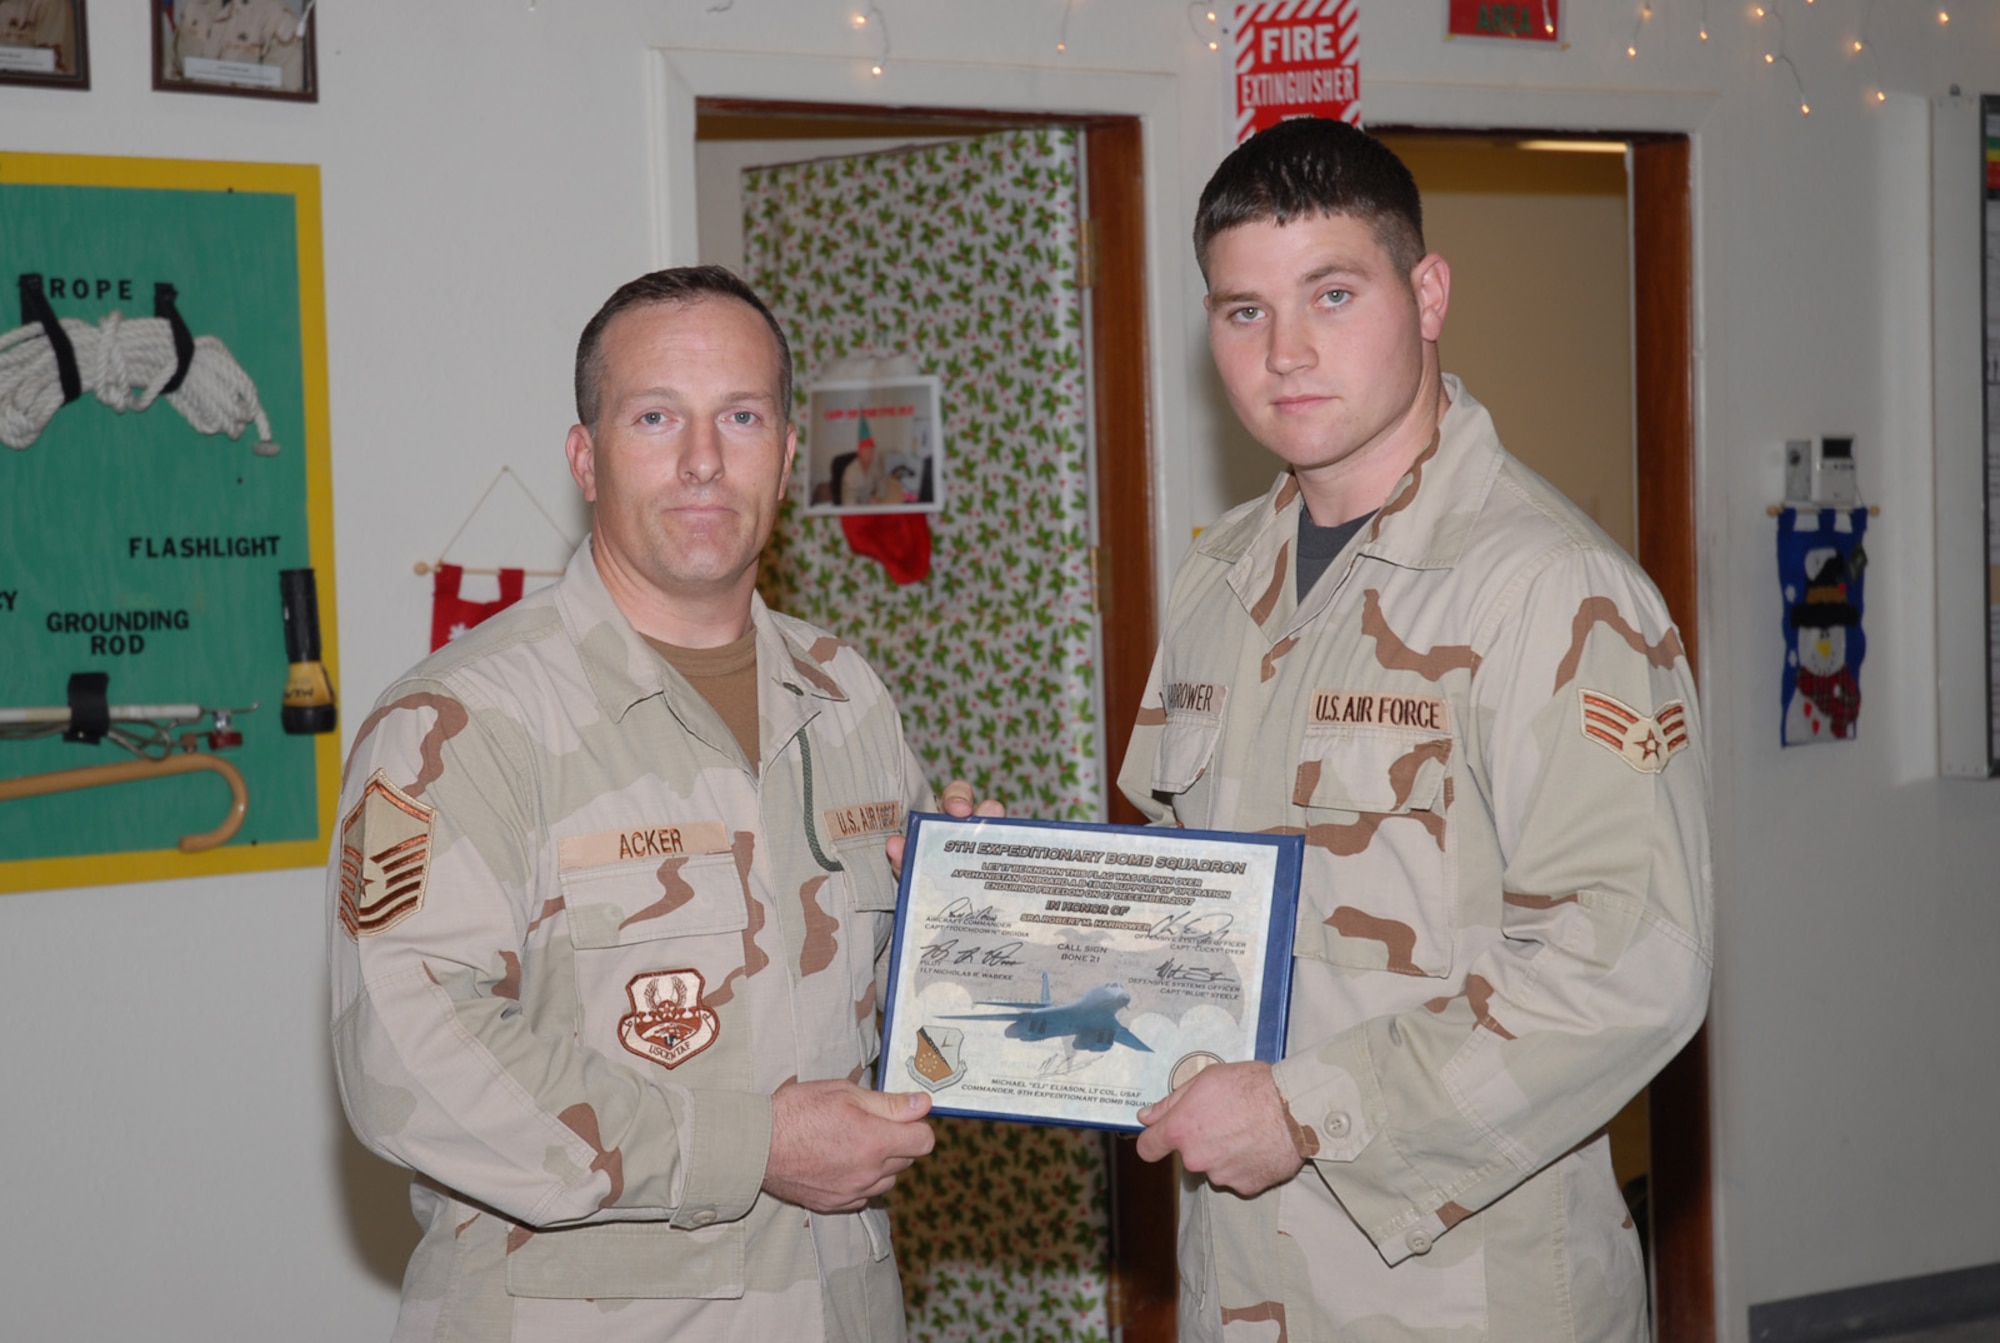 SOUTHWEST ASIA - Master Sgt Stephen Acker, Combined Air Operations Center,  congratulates Senior Airman Robert Harrower, 379th Expeditionary Maintenance Squadron, for being named a Hard Charger by his supervisors at a Southwest Asia air base Dec 10. The Hard Charger Award is presented to deserving airmen throughout the base on a monthly basis. (U. S. Air Force photo/Staff Sgt. Douglas Olsen)